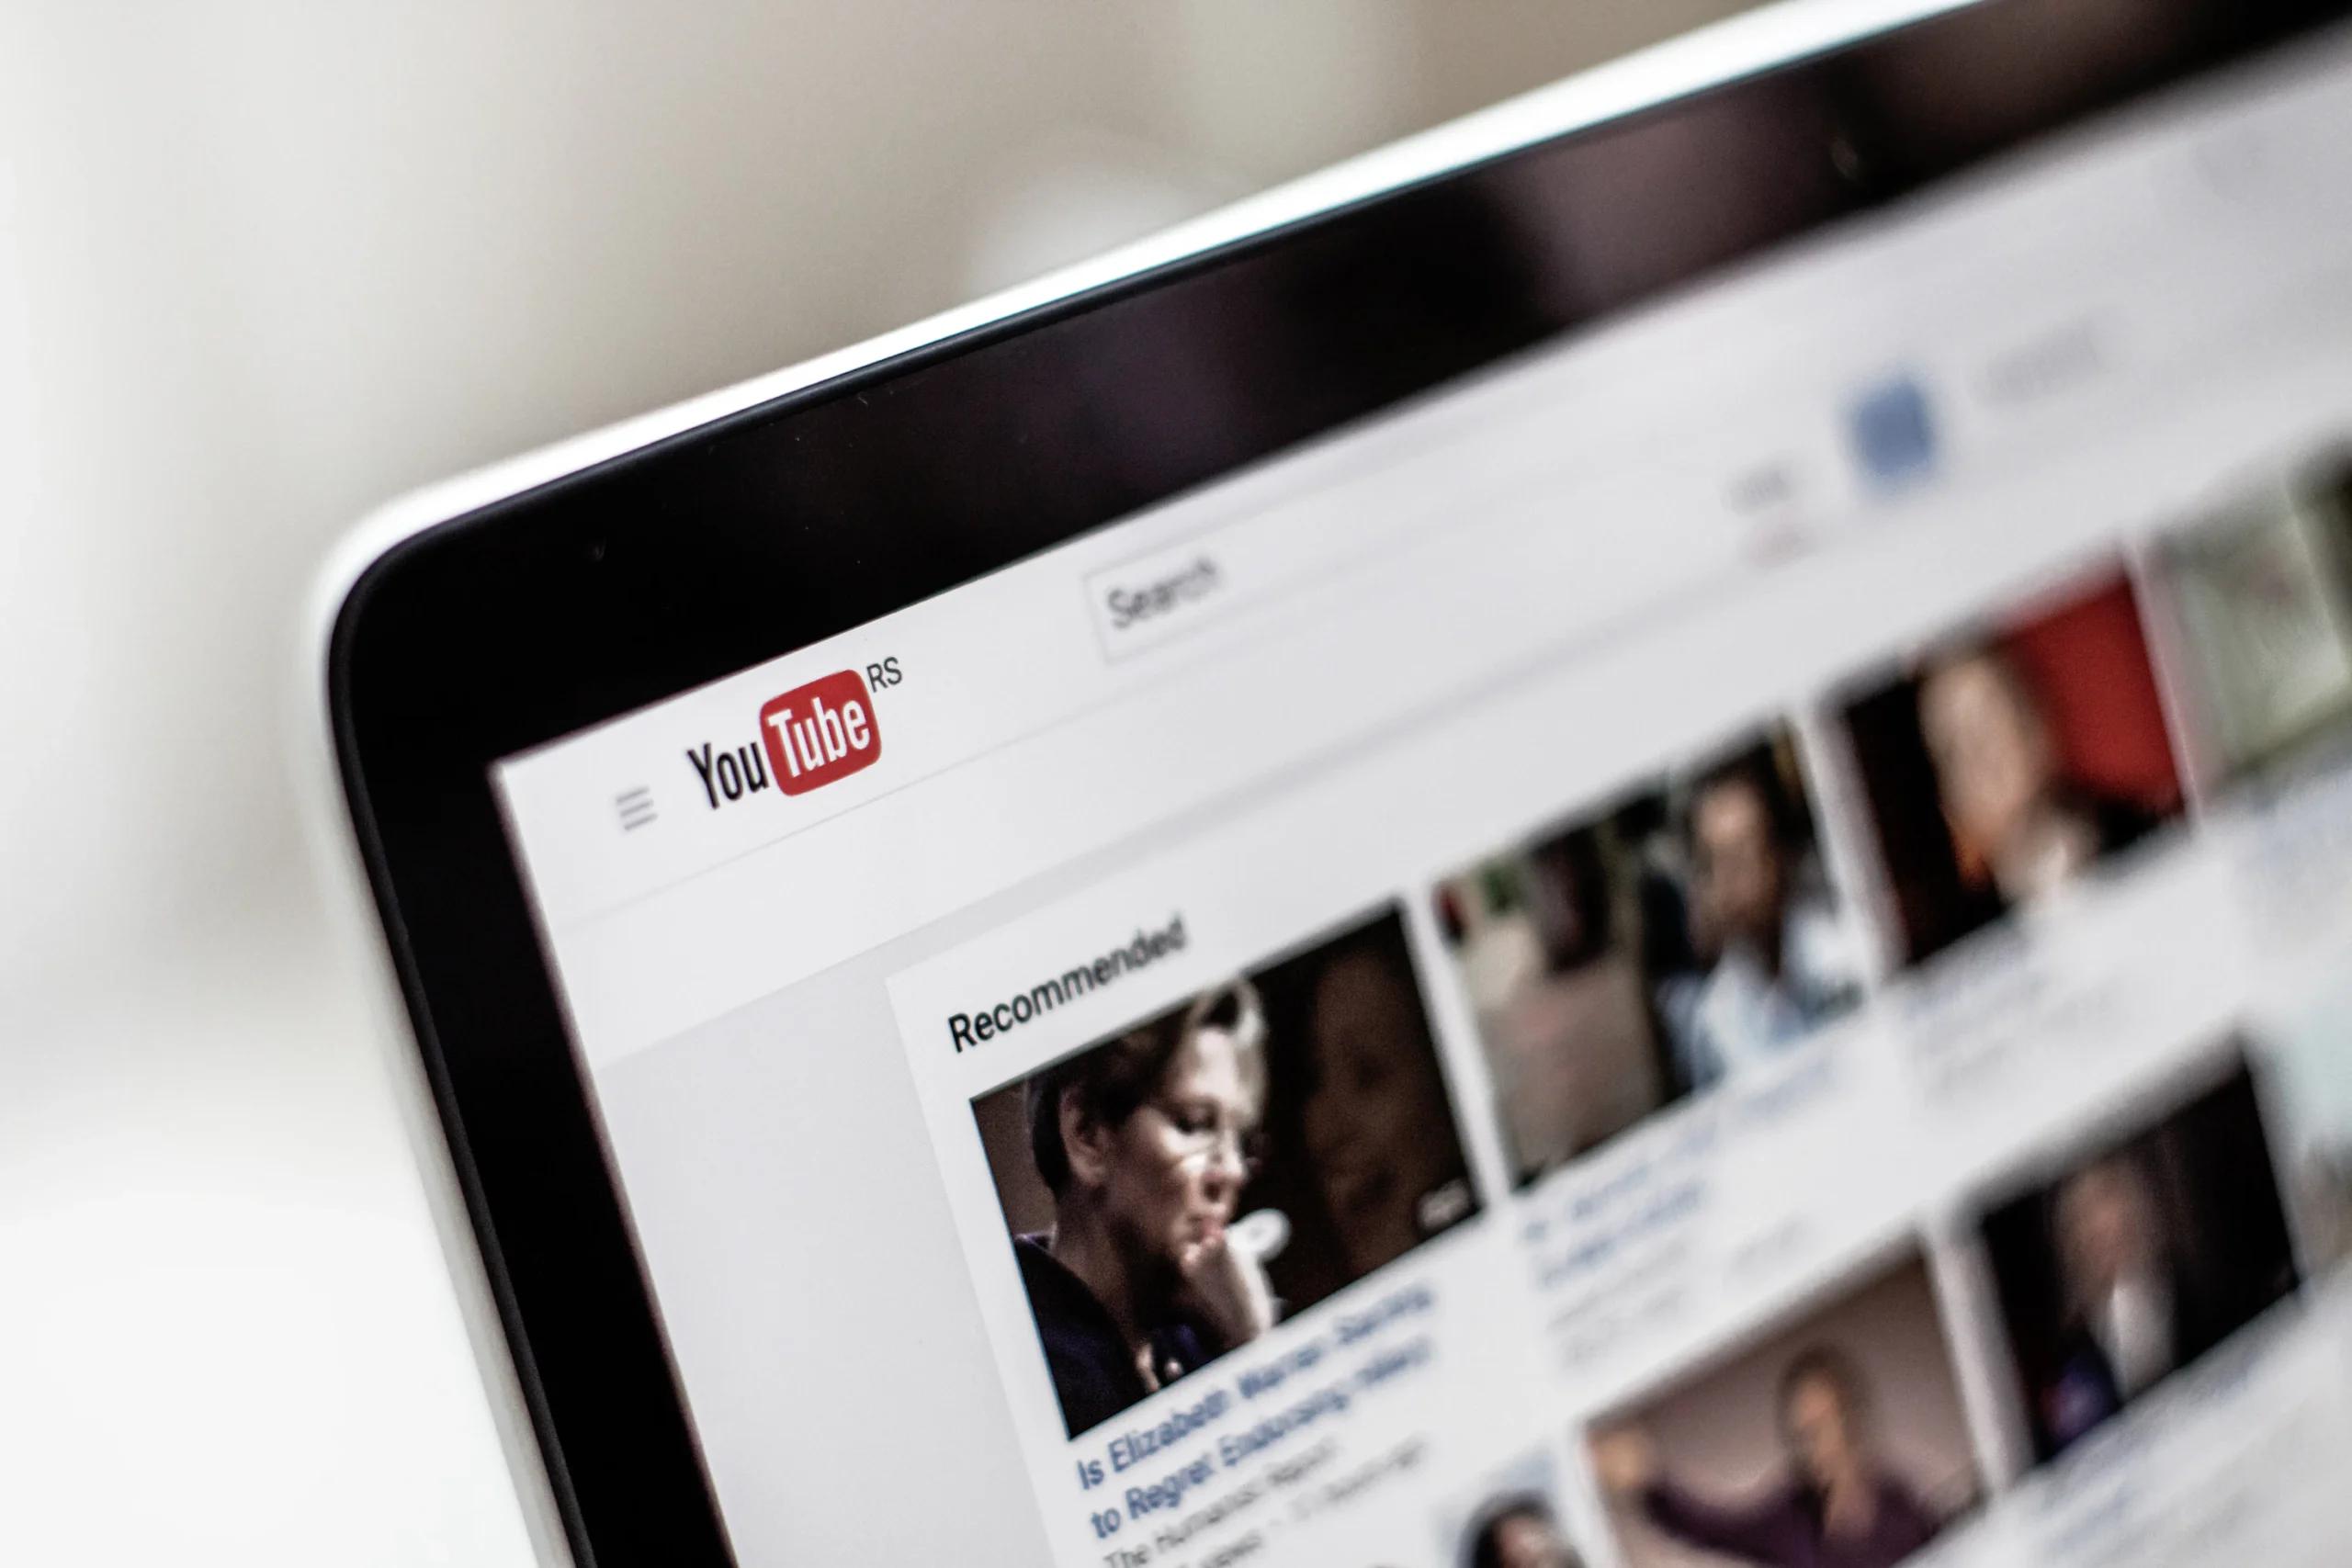 YouTube homepage shown on a laptop